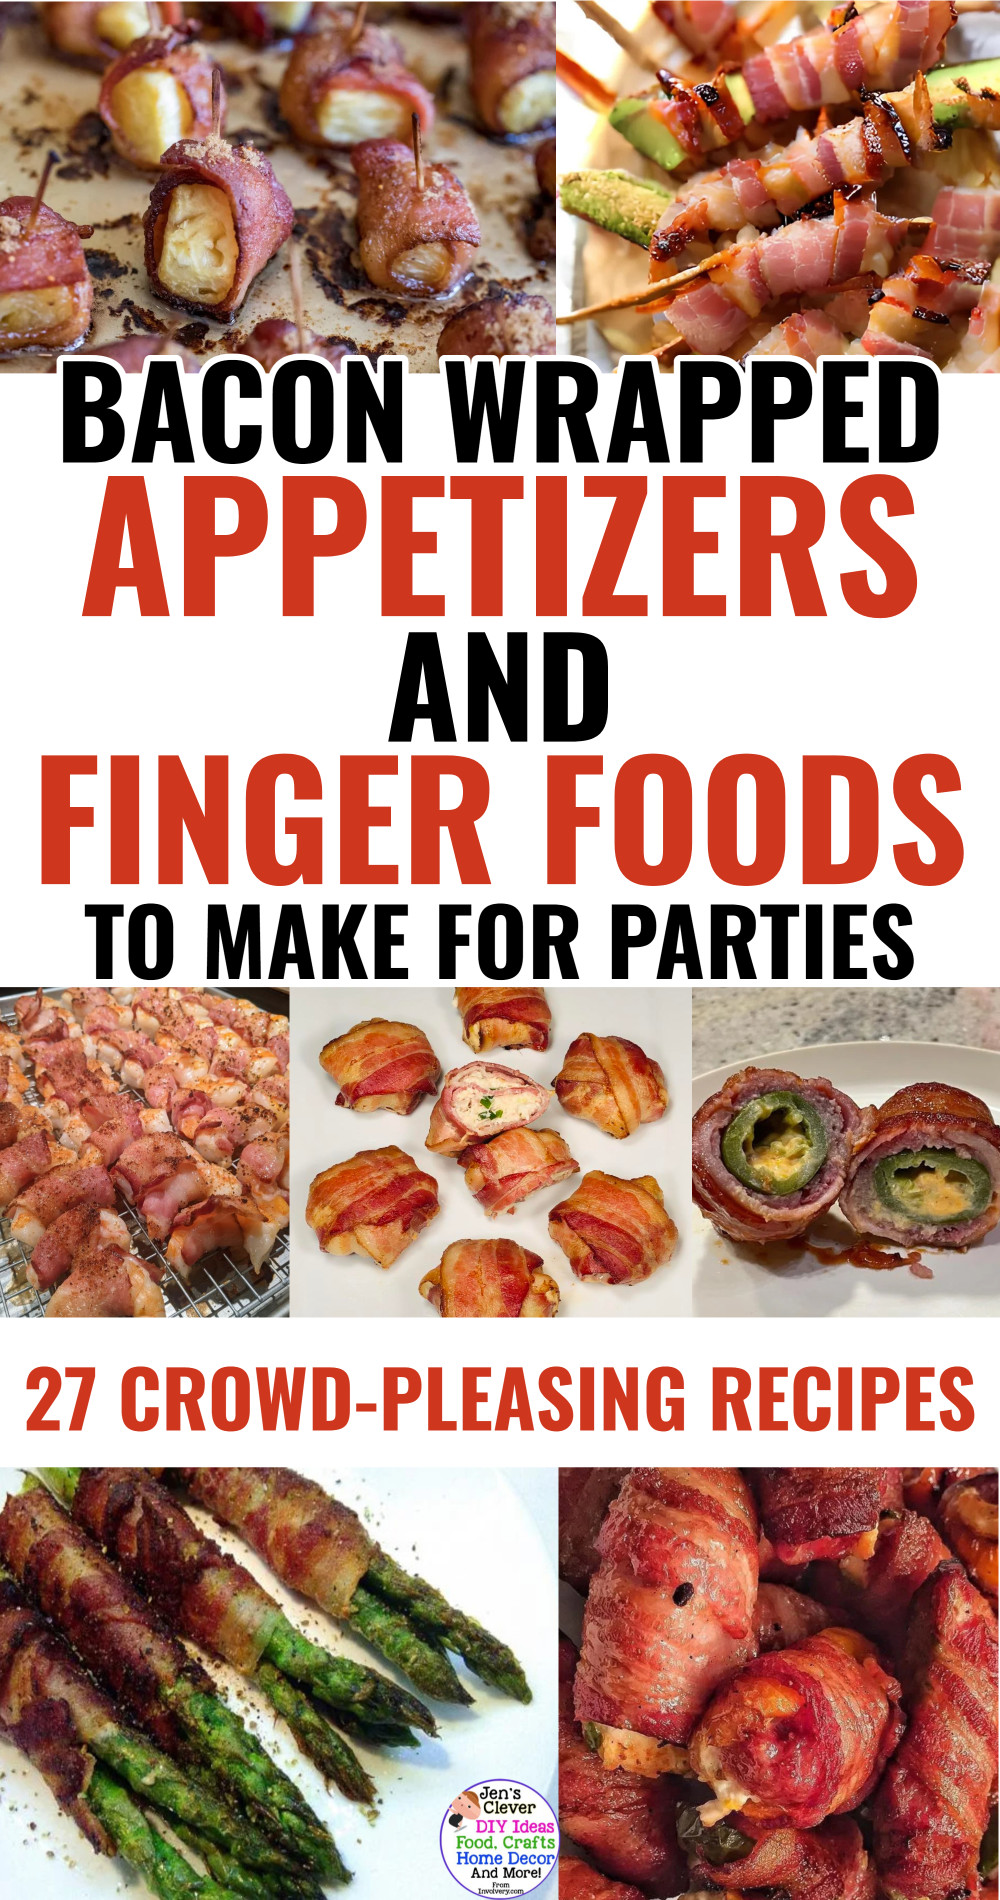 Bacon wrapped appetizers and finger foods to make for parties